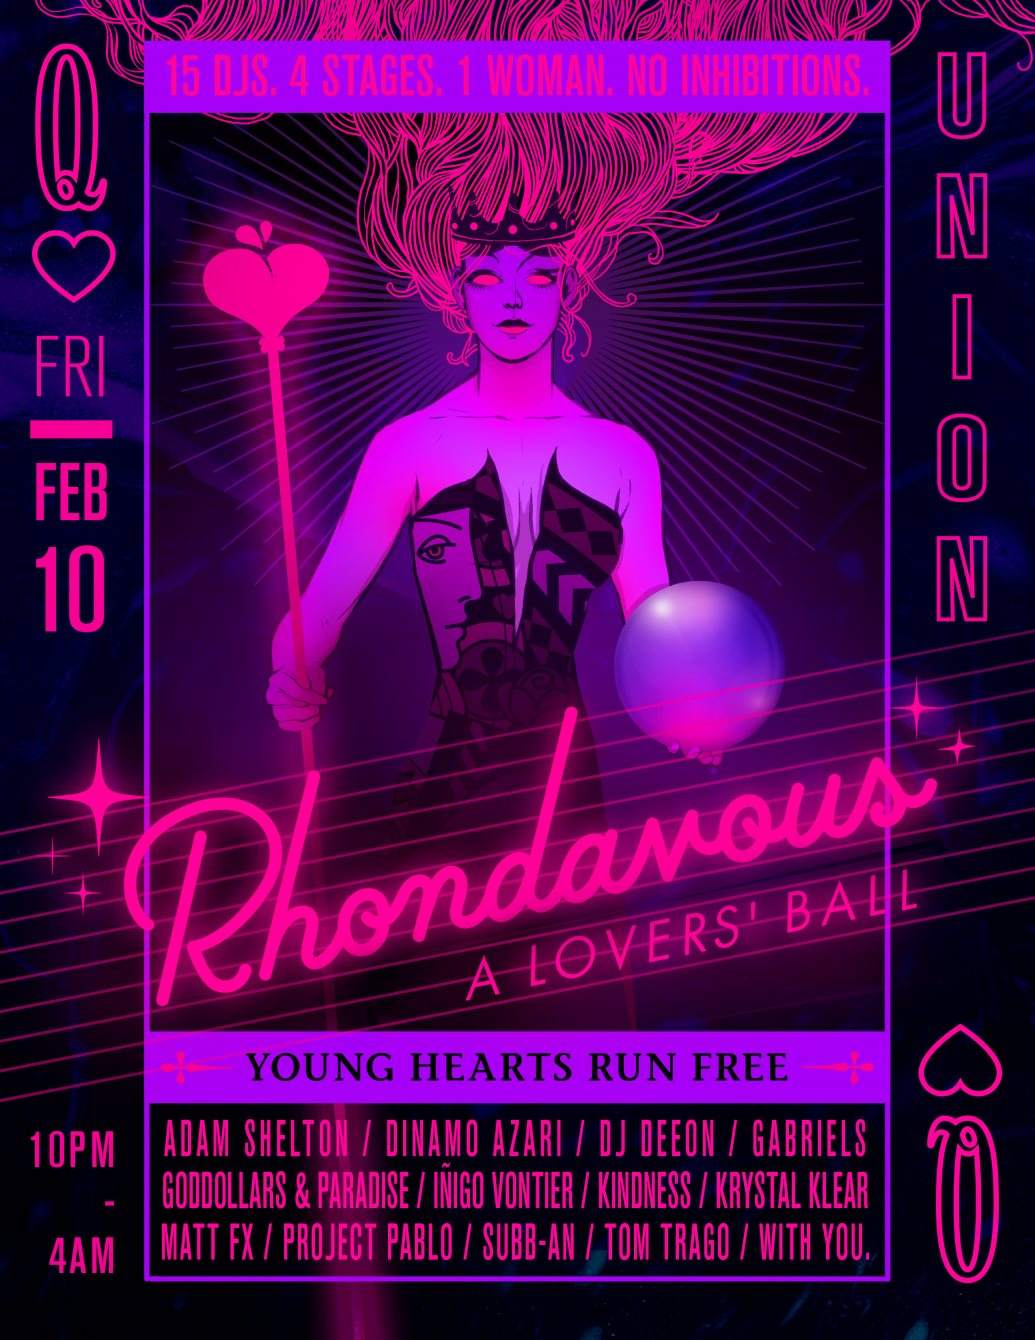 Rhondavous: A Lover's Ball - フライヤー表